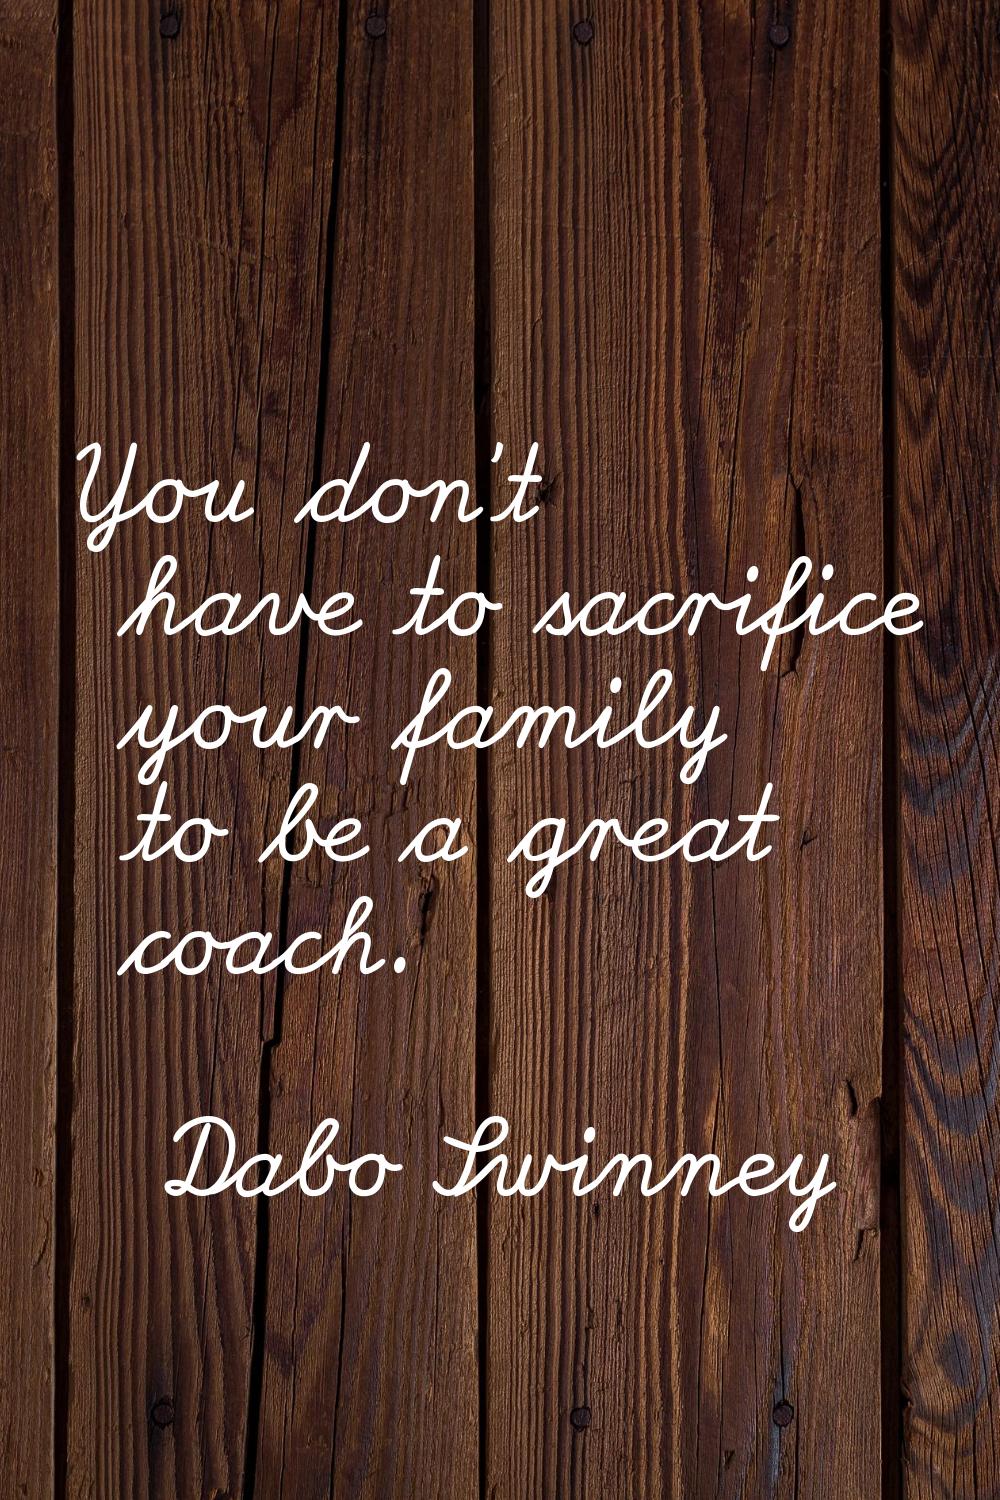 You don't have to sacrifice your family to be a great coach.